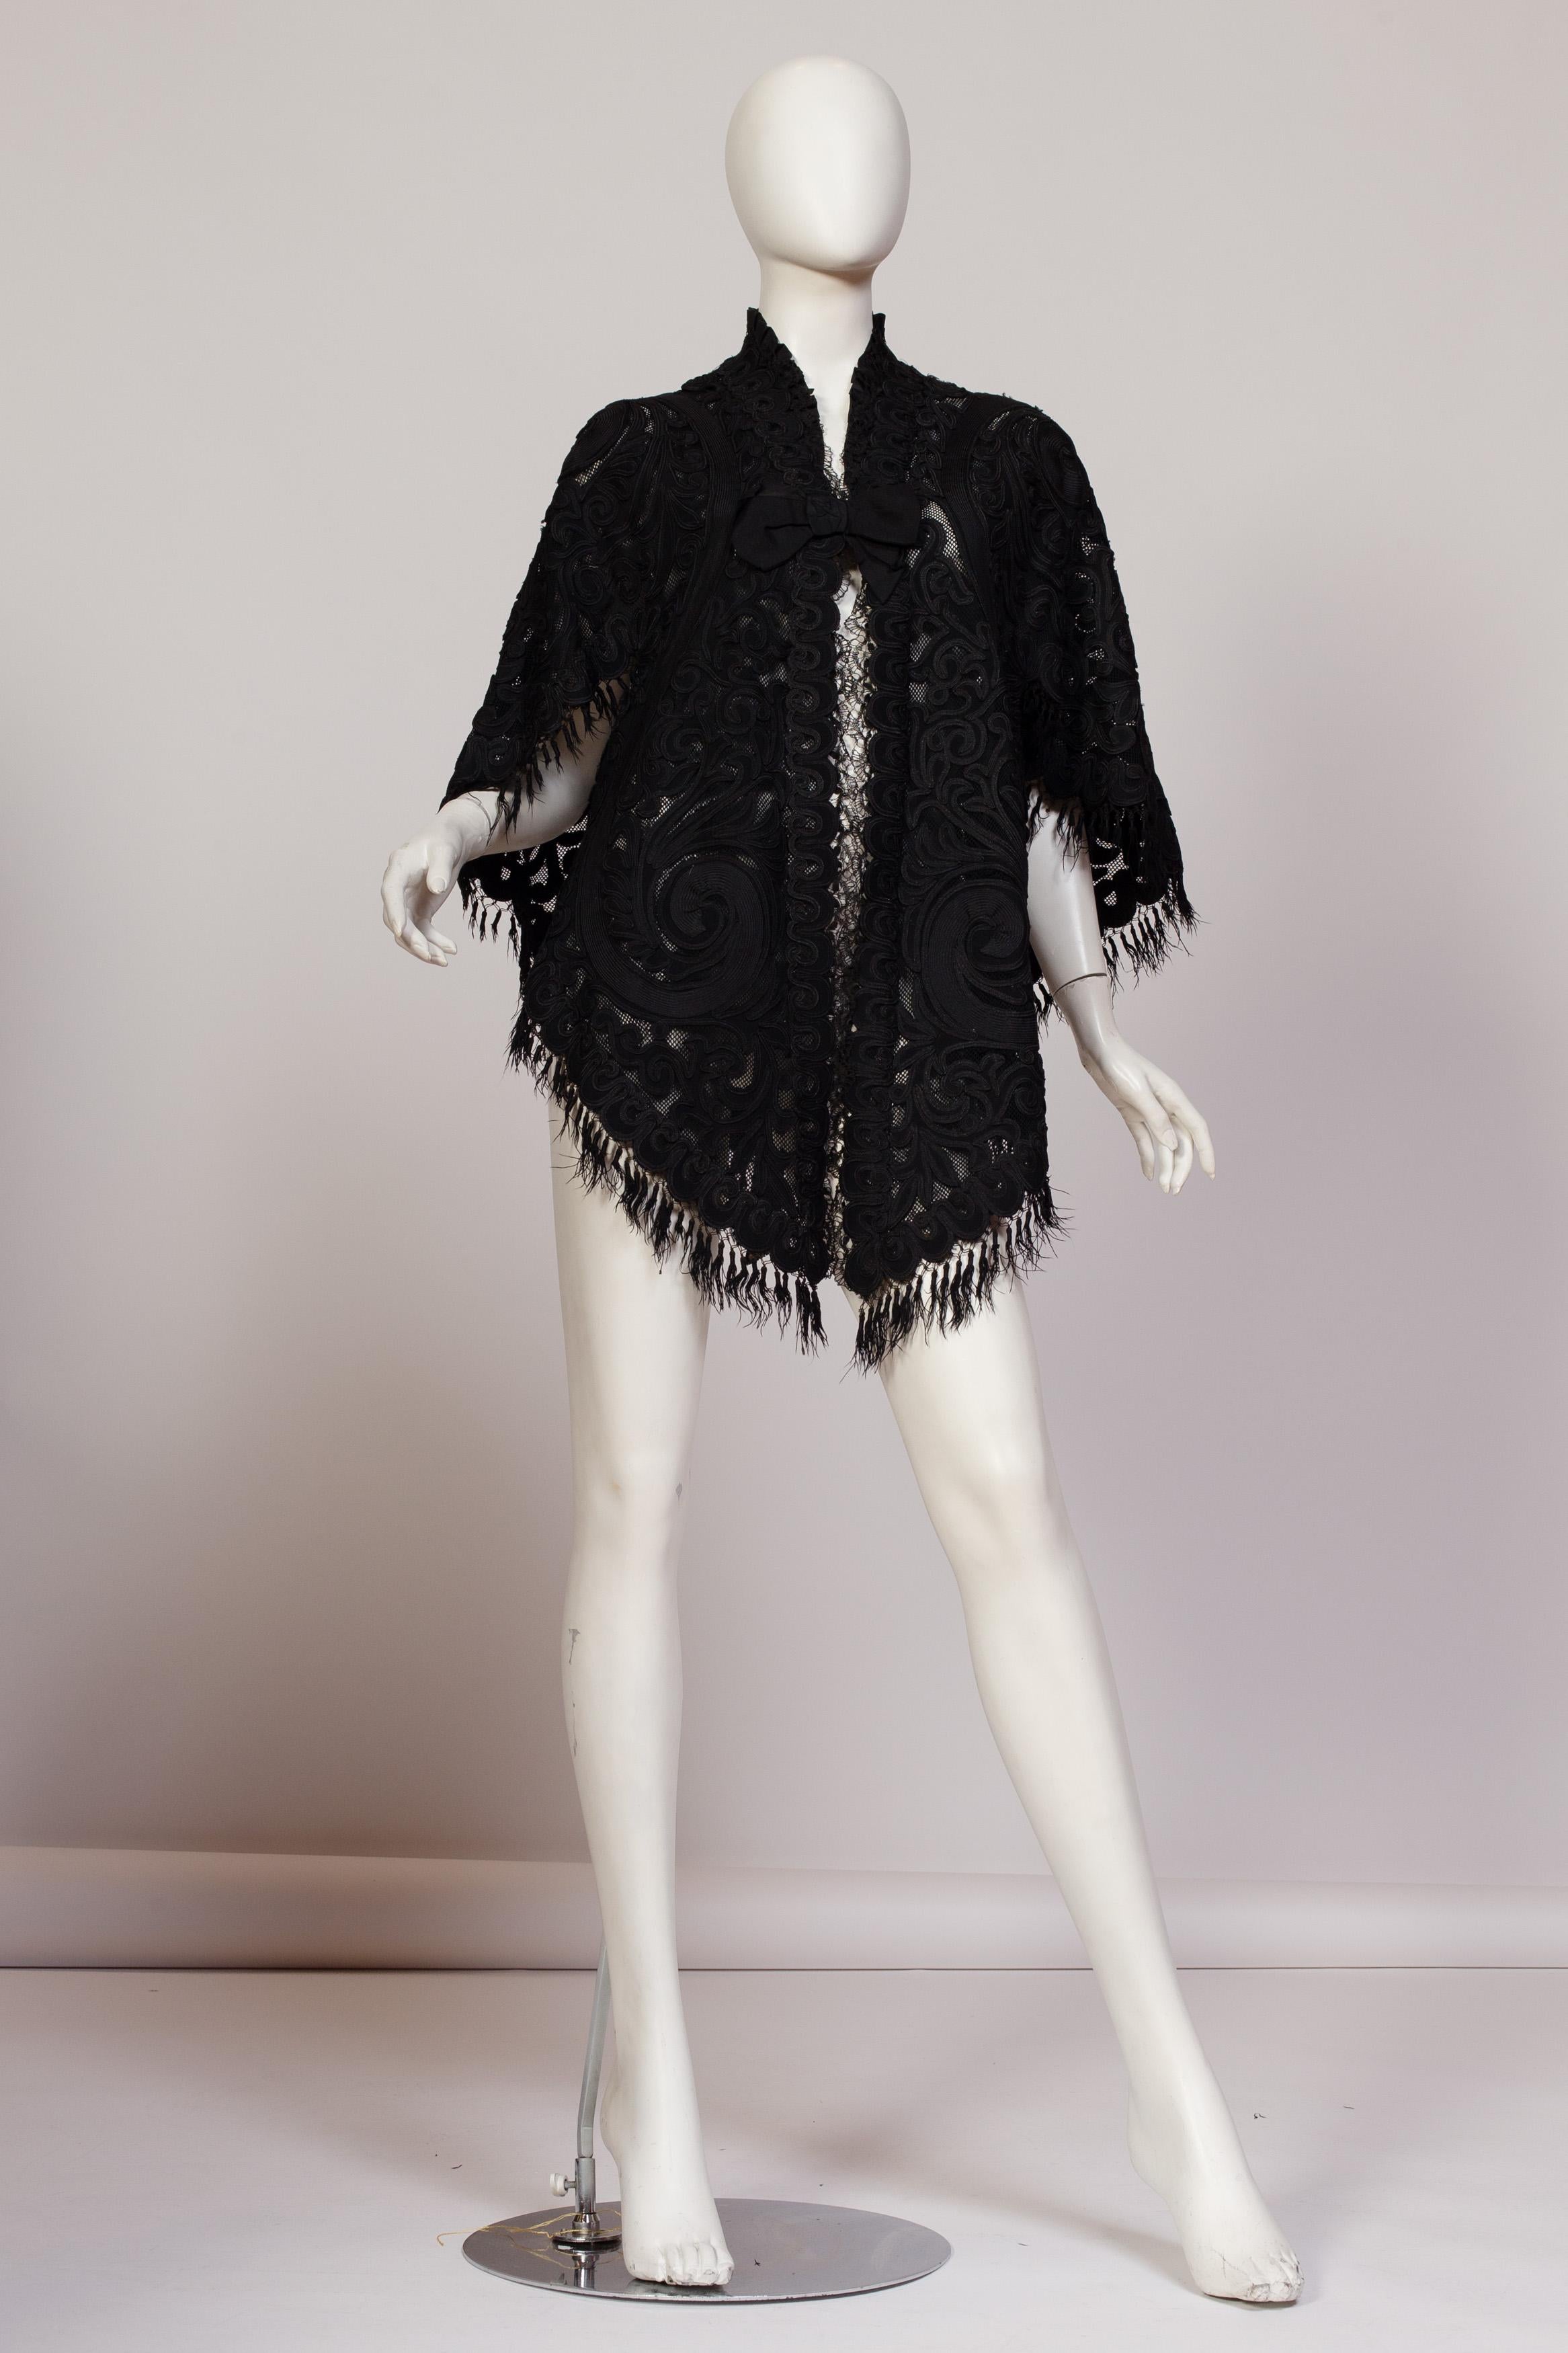 The sturdy net is covered in baroque wool appliqués outlined with silk soutache braid. The neckline and center front are edged in handmade cluny lace. The hem is trimmed in silk tasseled fringe which is the only area really showing age. In pretty